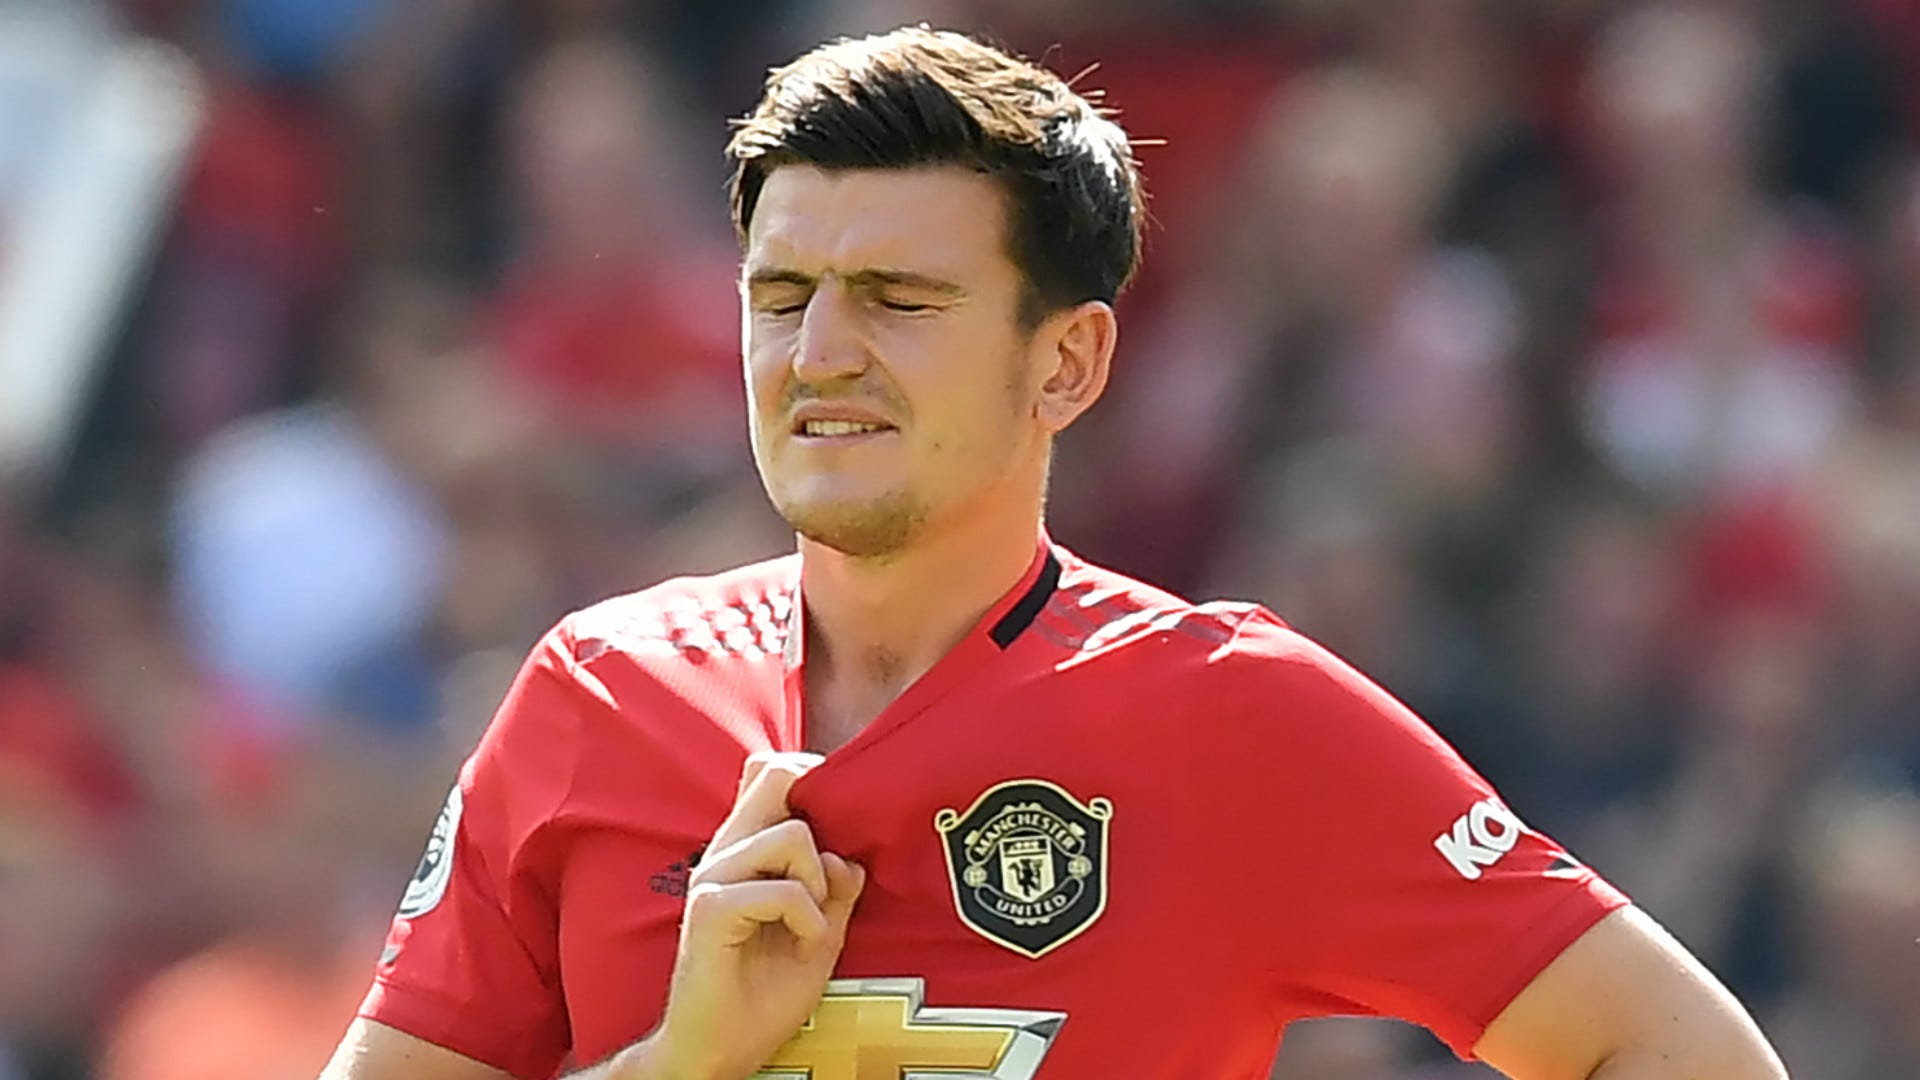 ‘Playing against your old club is sh*t’ – Maguire sent Man Utd warning ahead of Leicester reunion